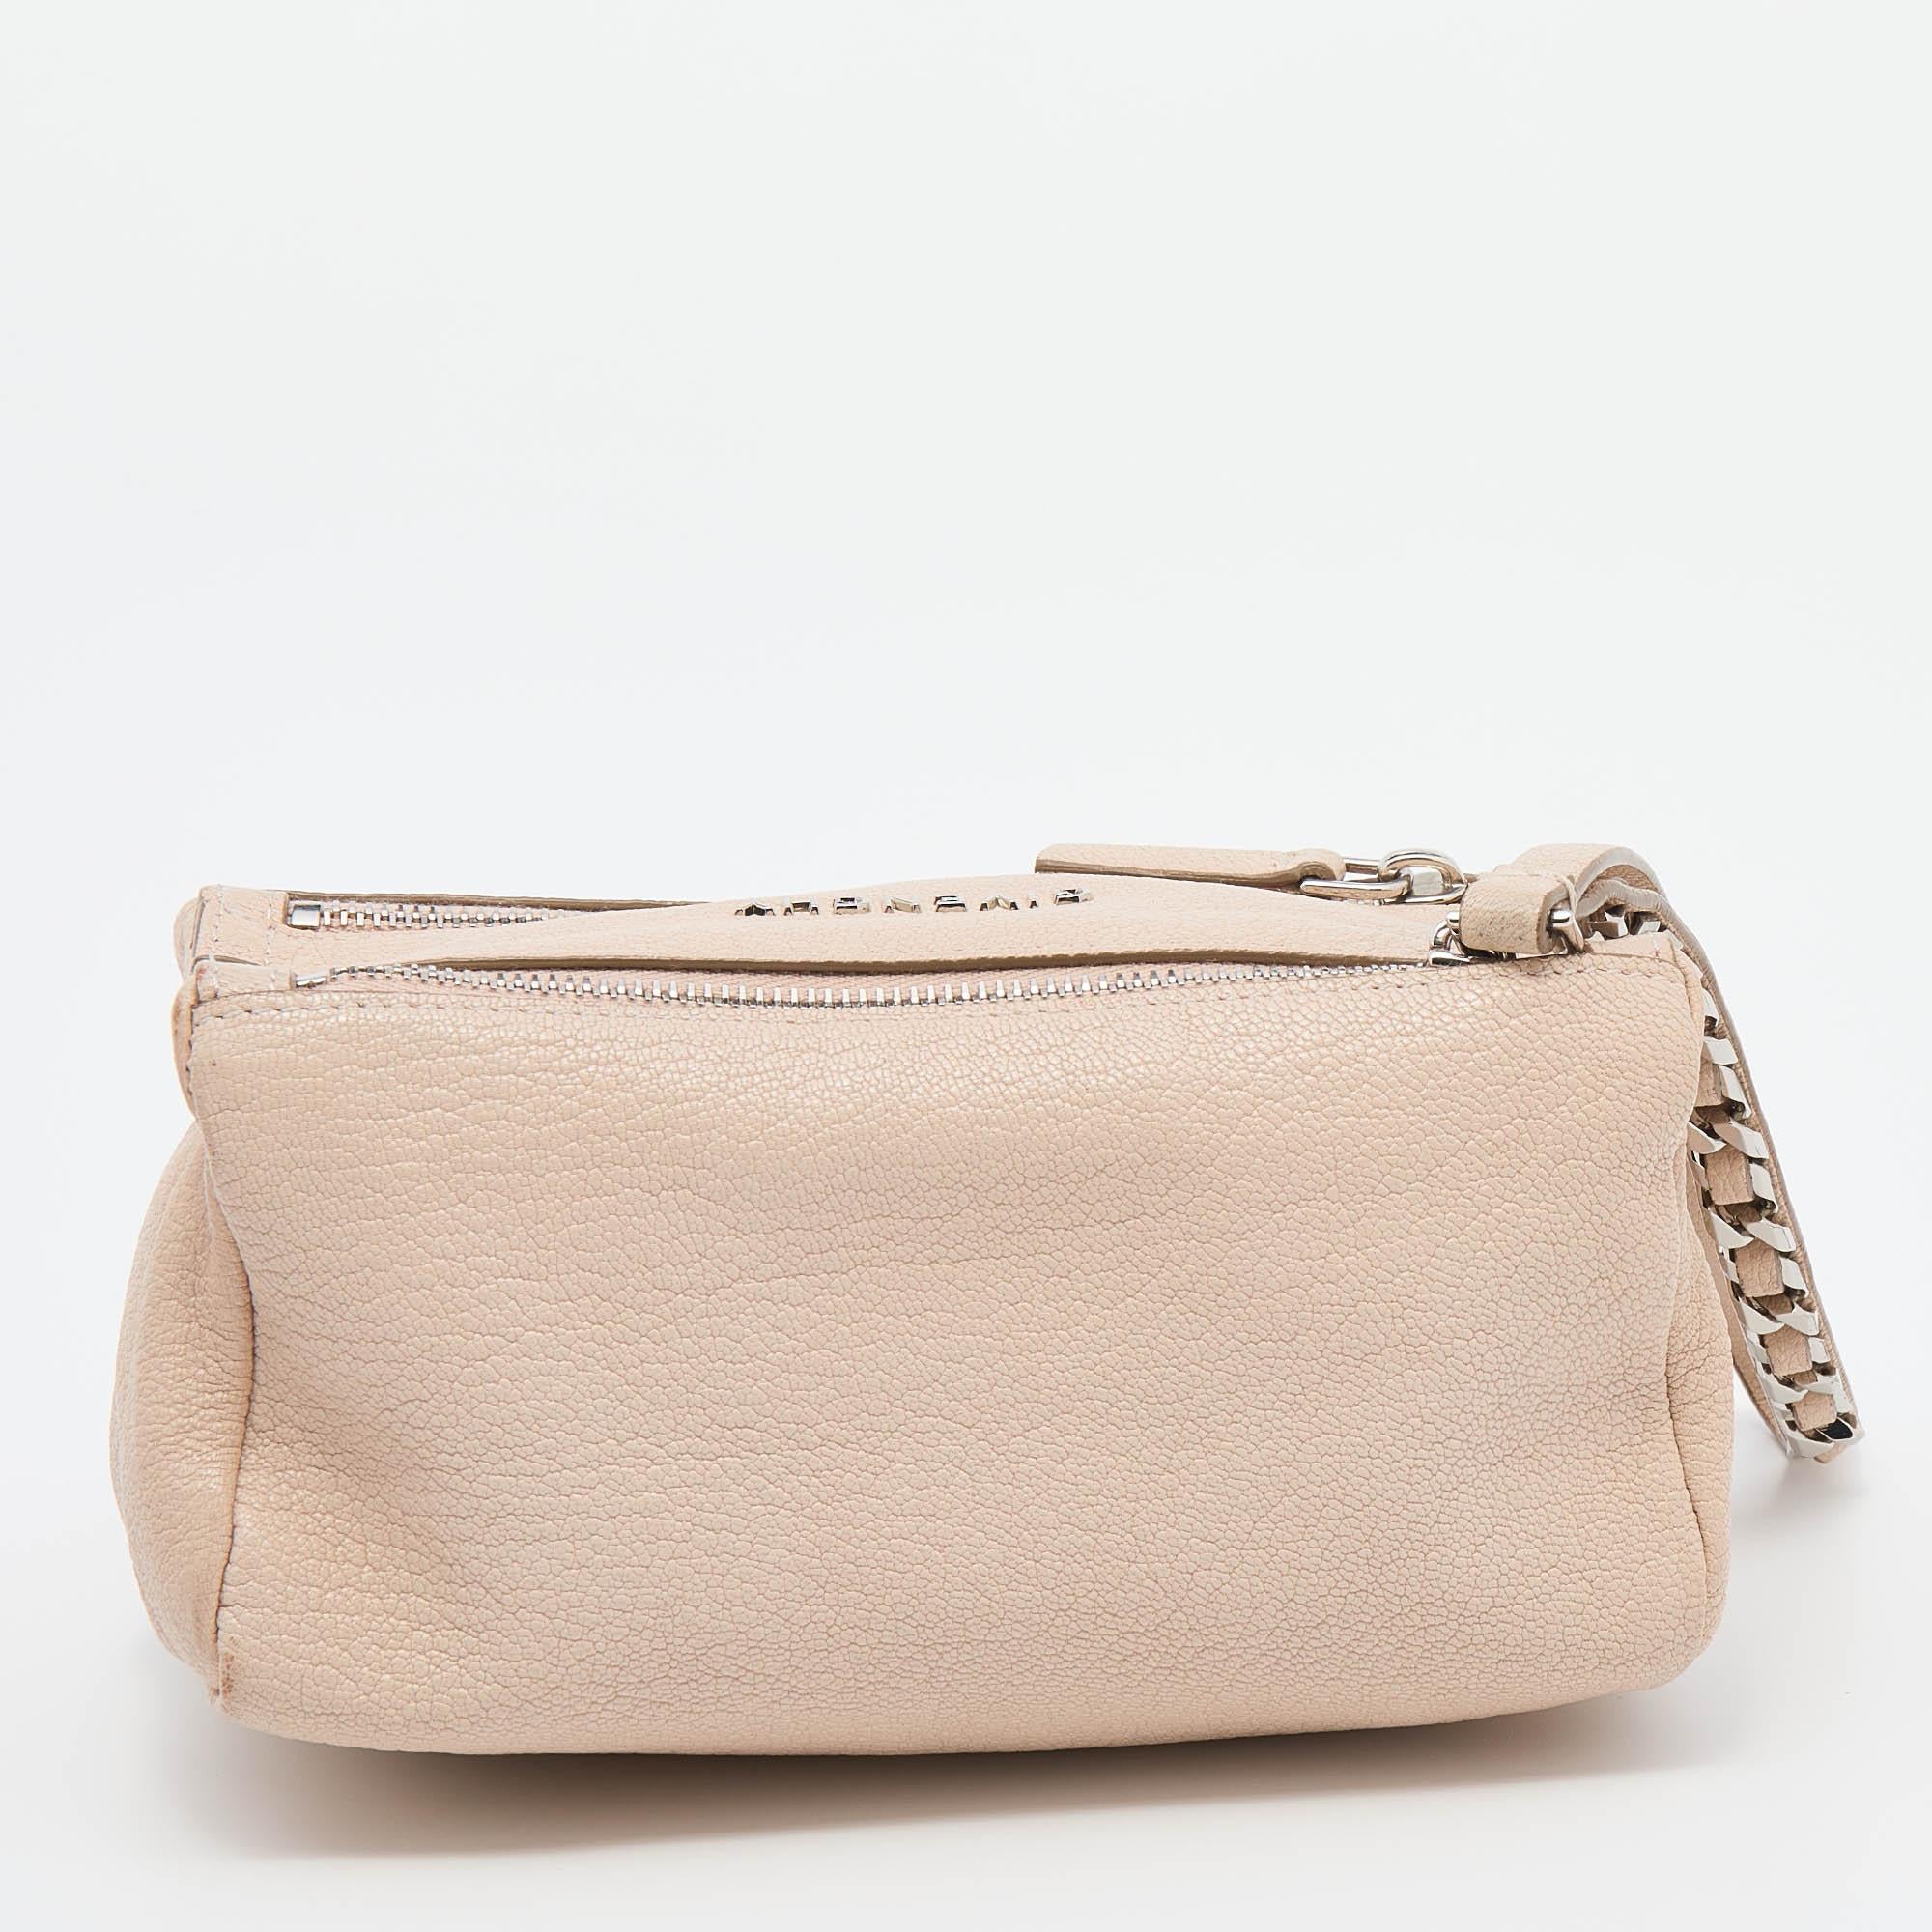 This lovely wristlet clutch is by Givenchy. It has been made in Italy from leather and shaped to perfectly carry your necessities. The sleek beige piece has a simple design and is equipped with two zippers that are held by a chain-leather strap. The